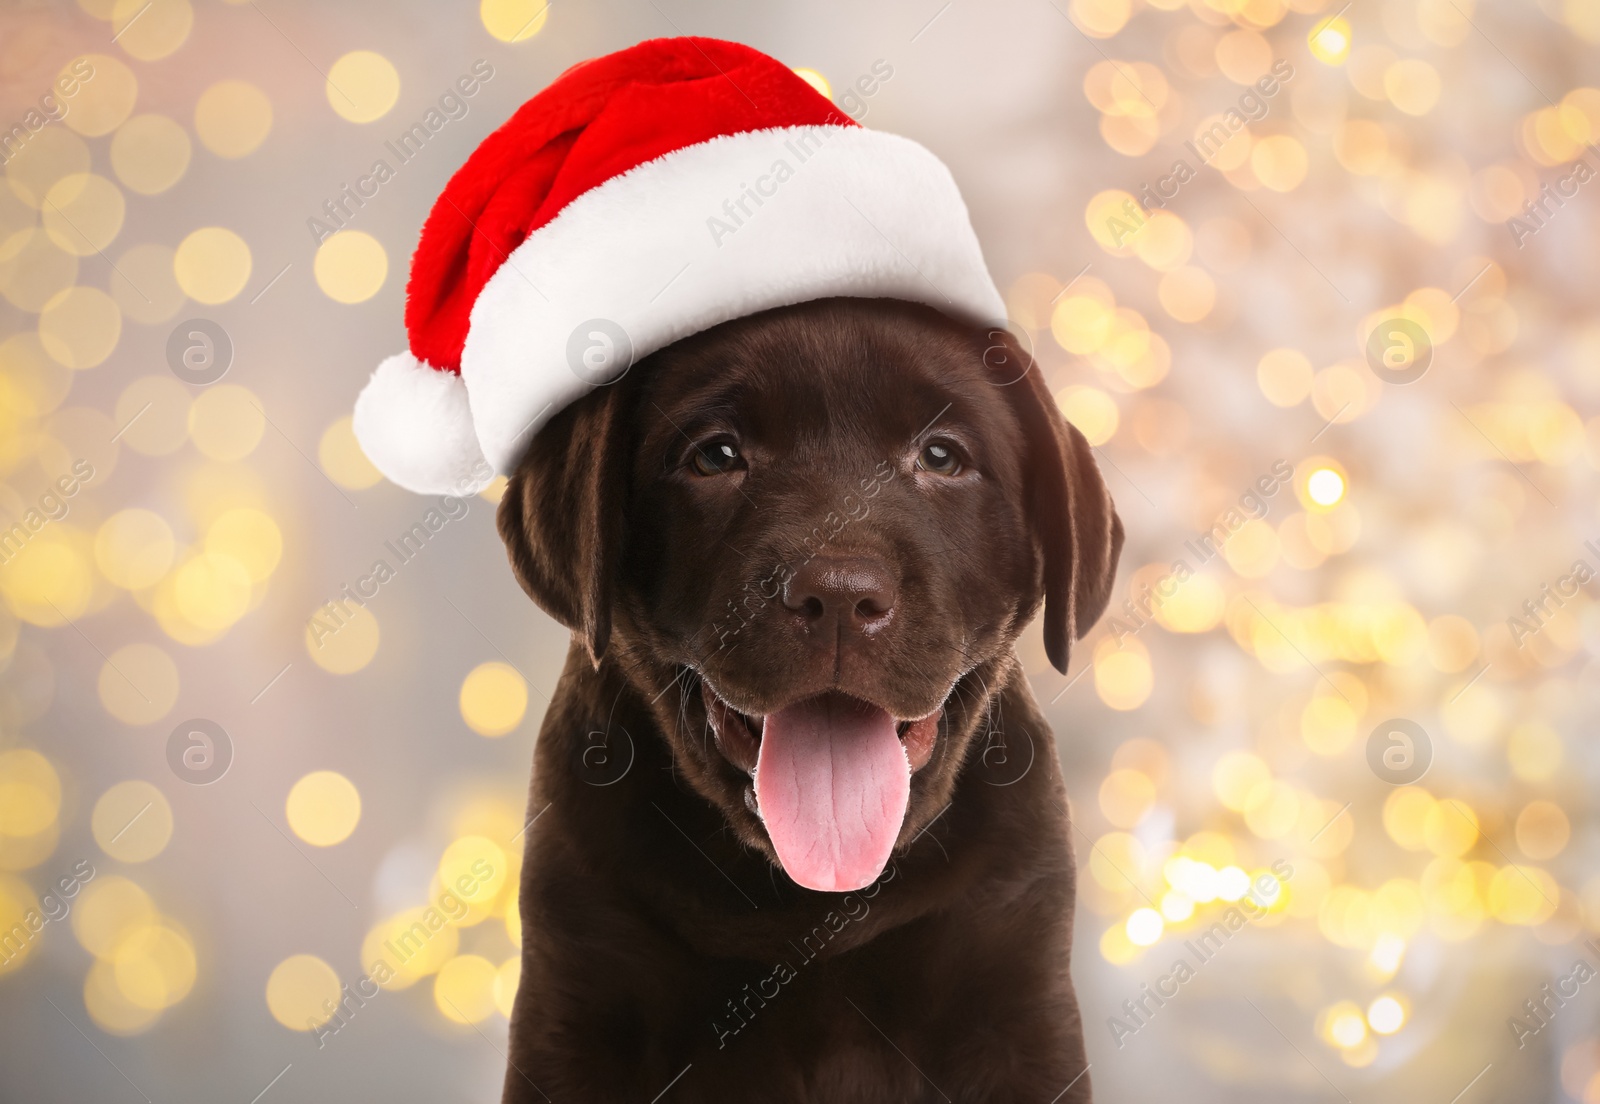 Image of Chocolate Labrador Retriever puppy with Santa hat and blurred Christmas lights on background. Lovely dog